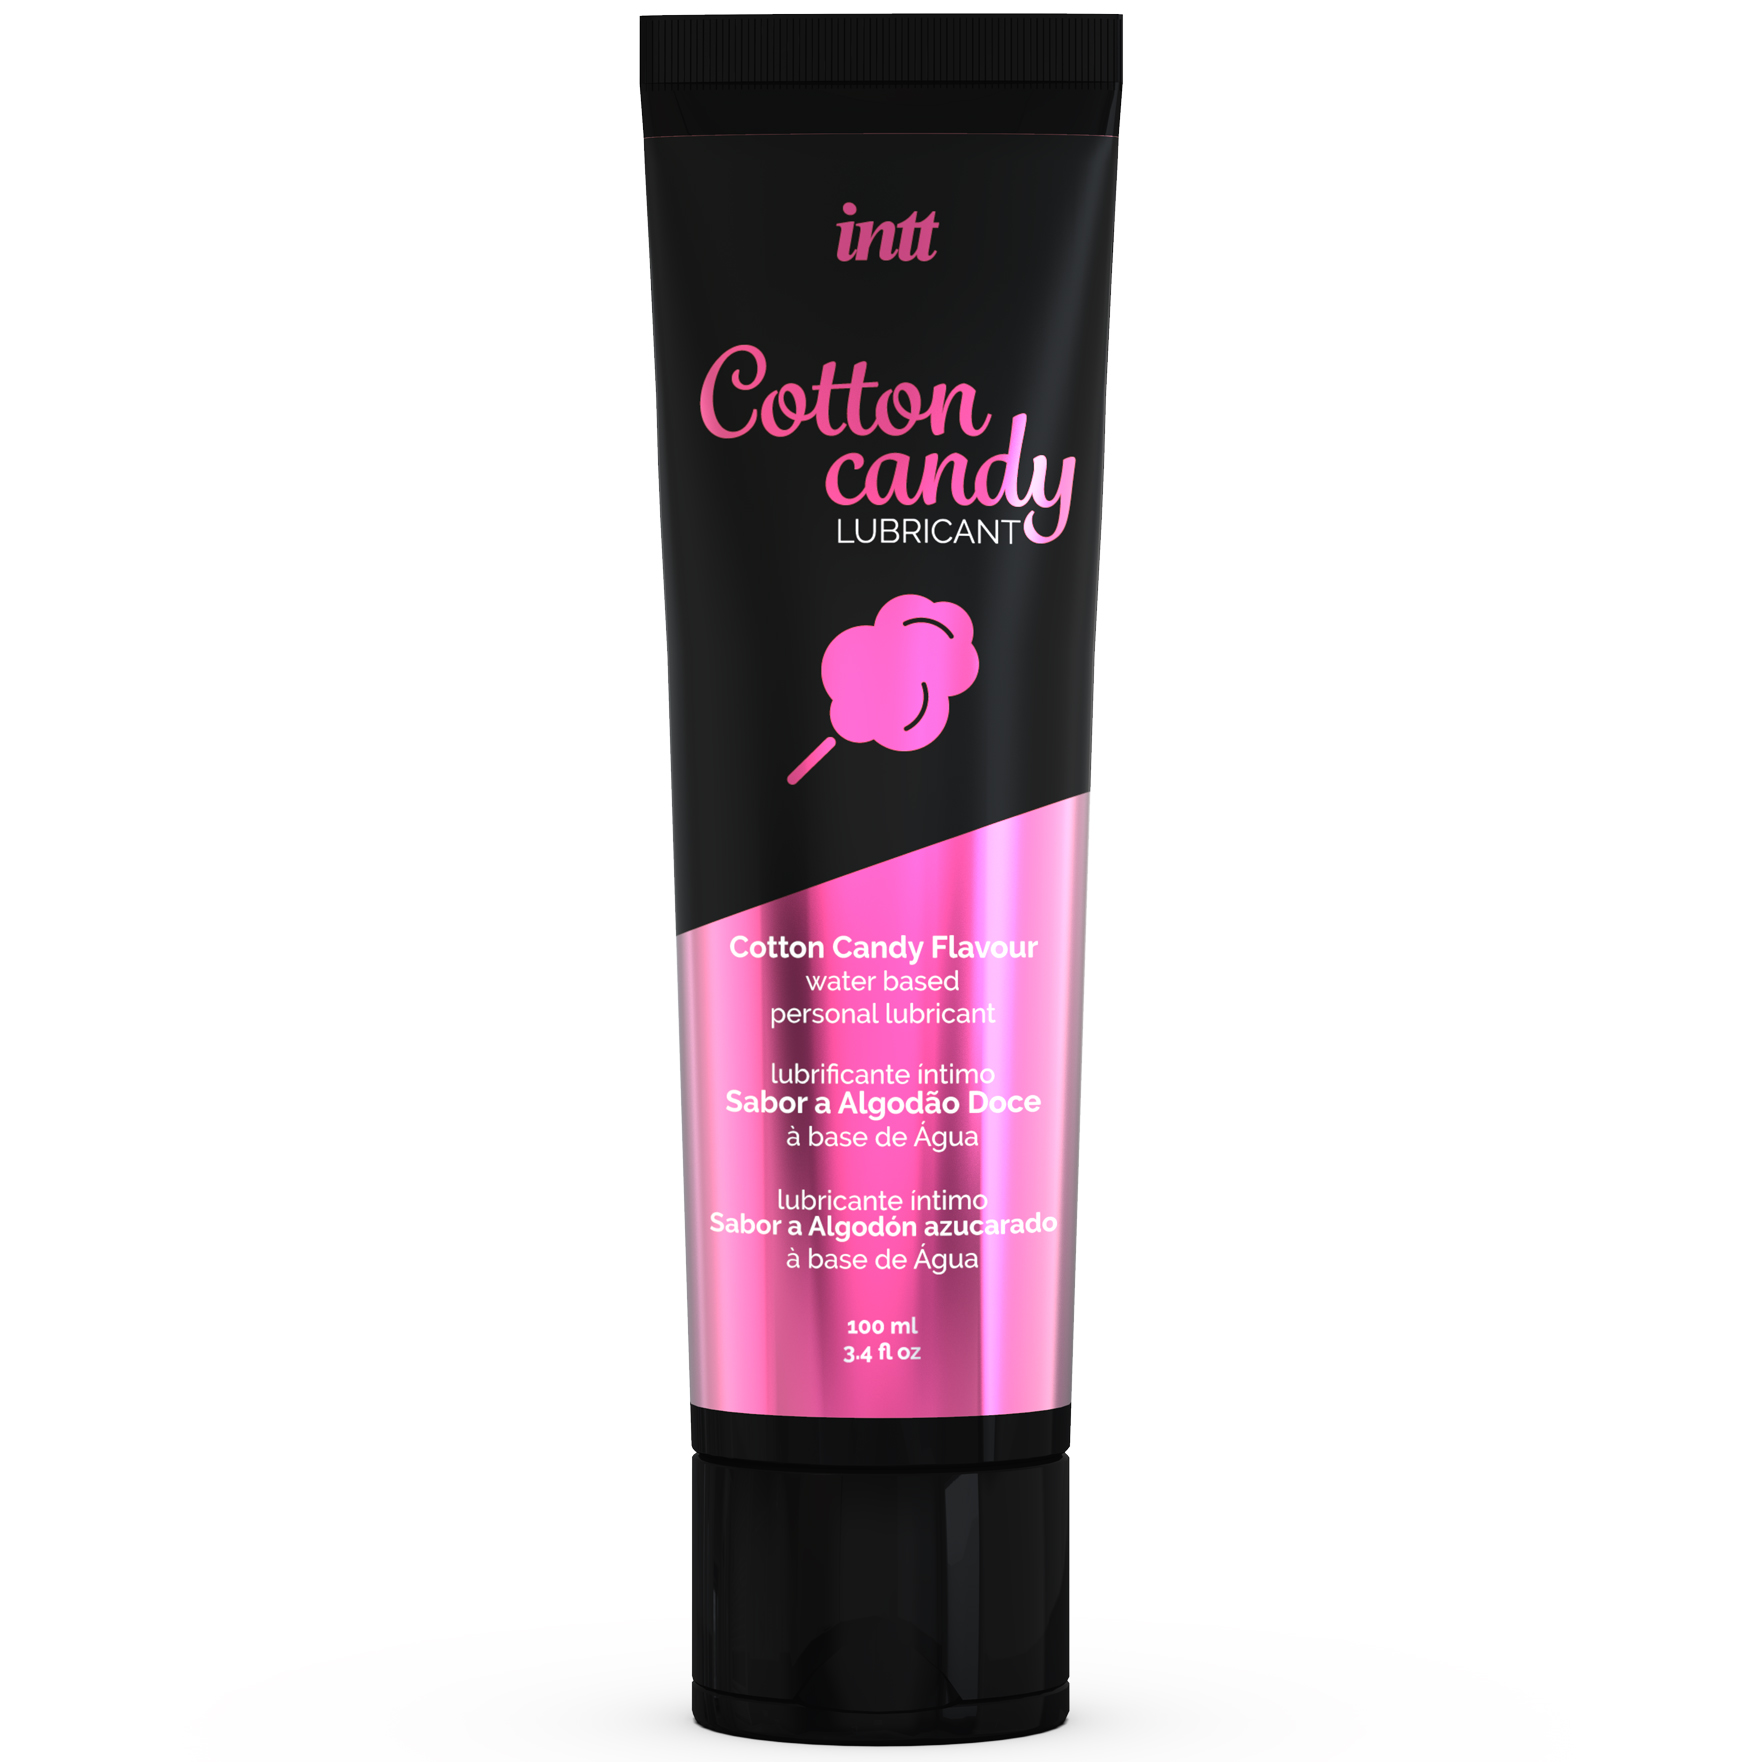 intt Cotton Candy Lubricant100ml